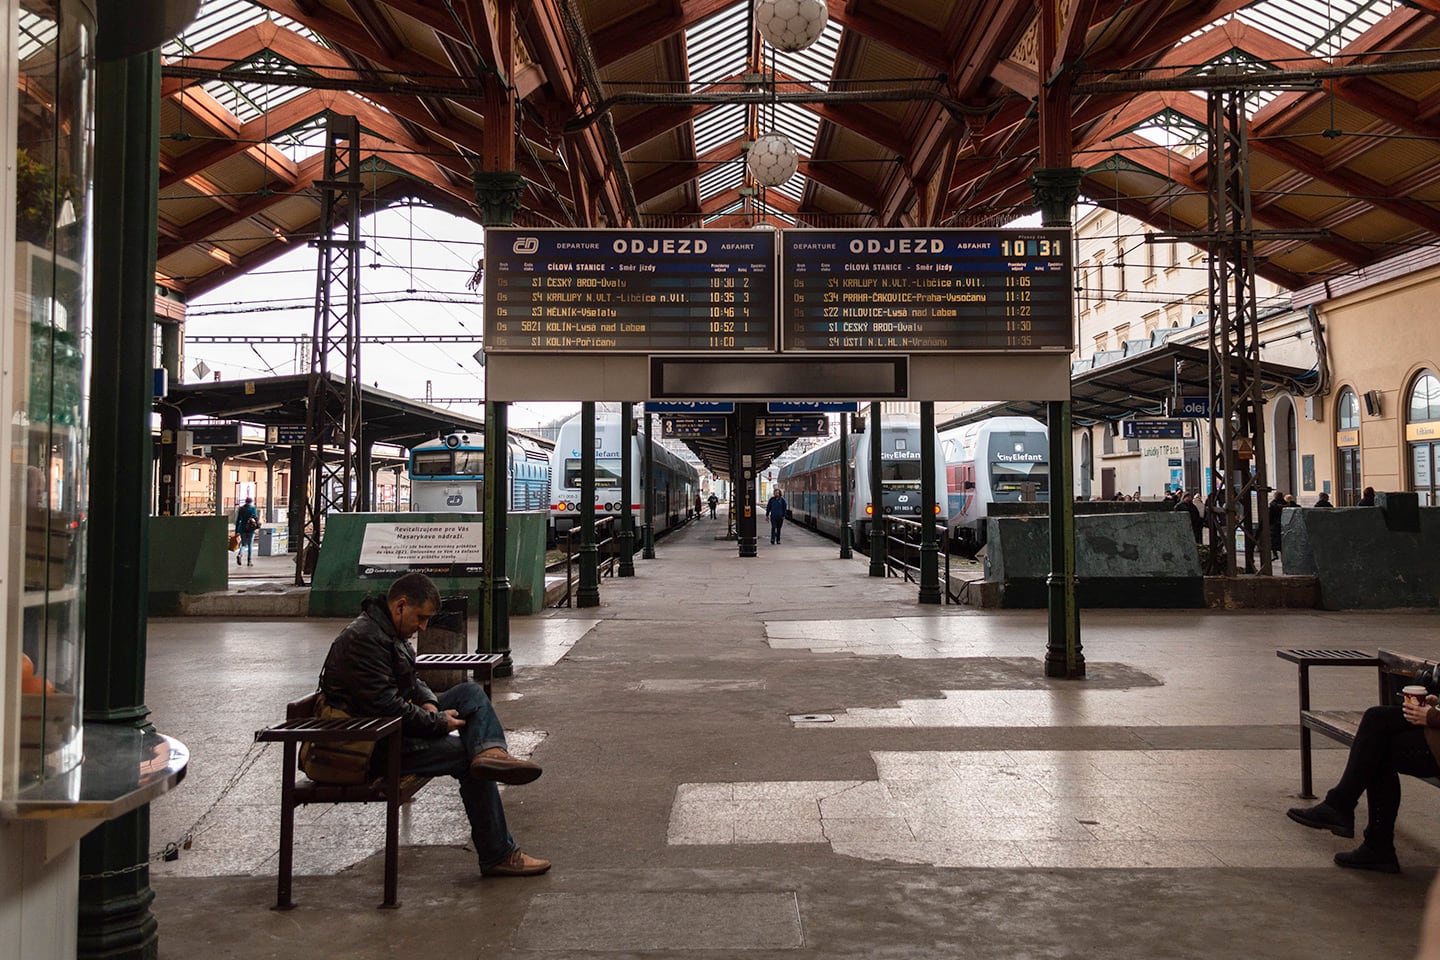 Foreground: man sits on wooden bench in Prague Station. Behind a flipboard showing train times. Behind that, the trains at the platforms.